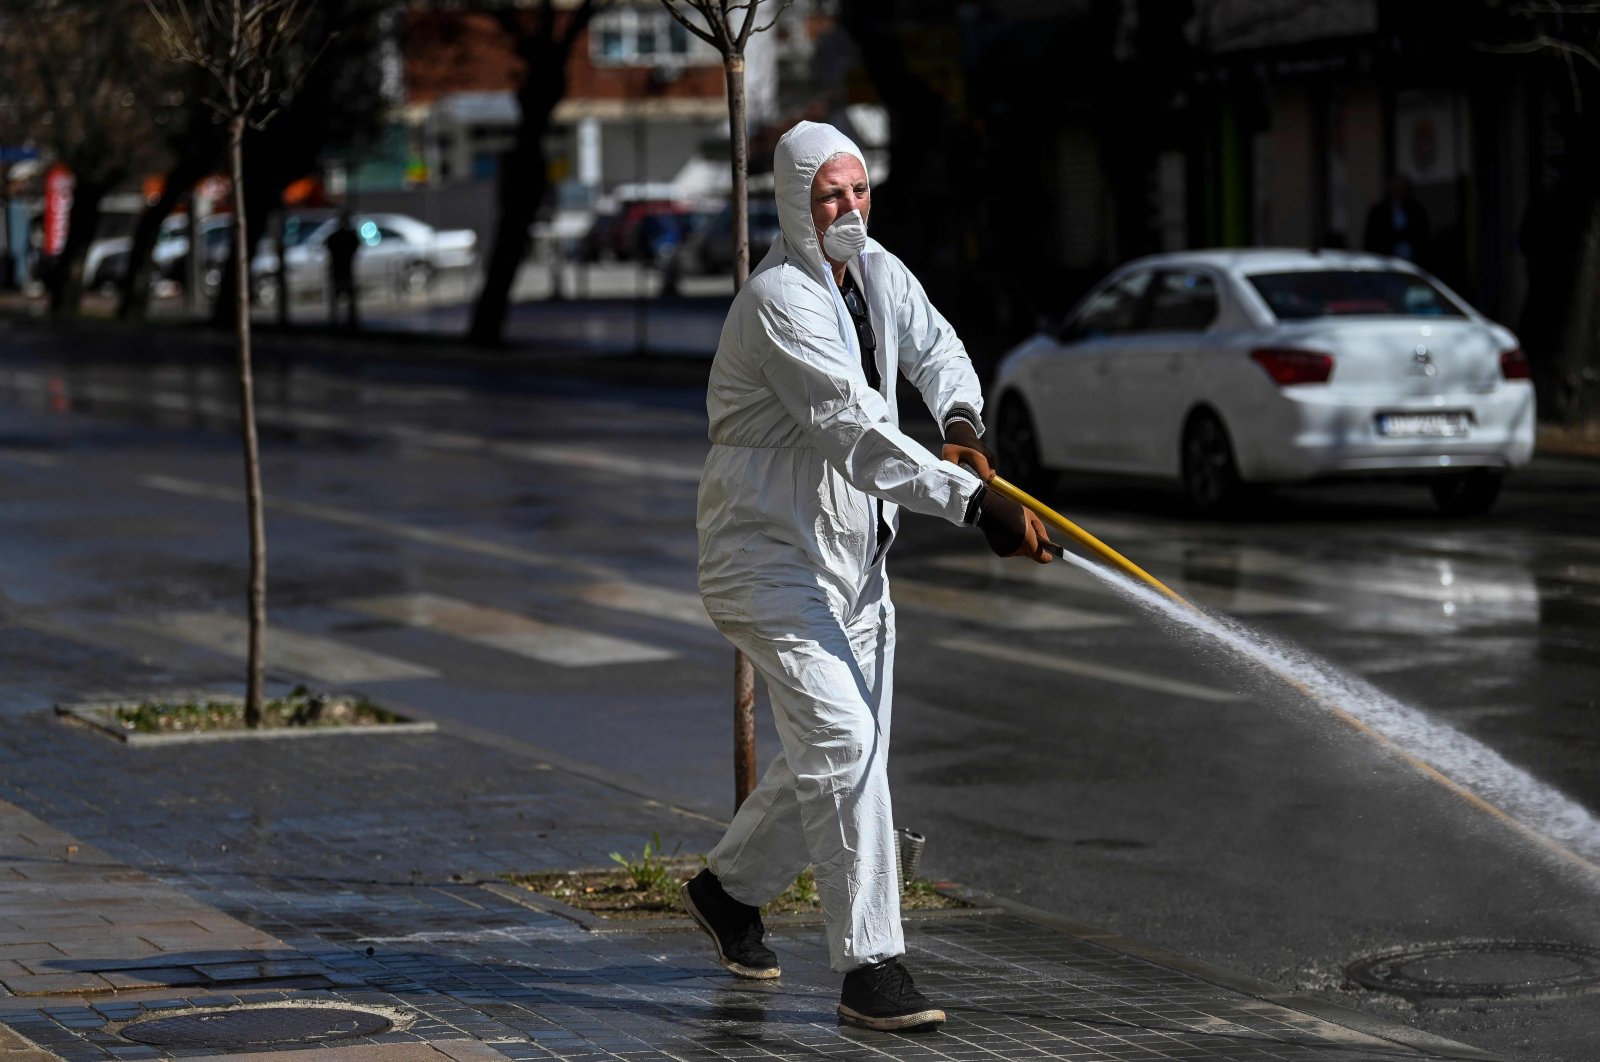 A municipality worker disinfects a street in Pristina, as part of measures to attempt to prevent the spread of the COVID-19 caused by the new Coronavirus, Tuesday, March 17, 2020. (AFP)